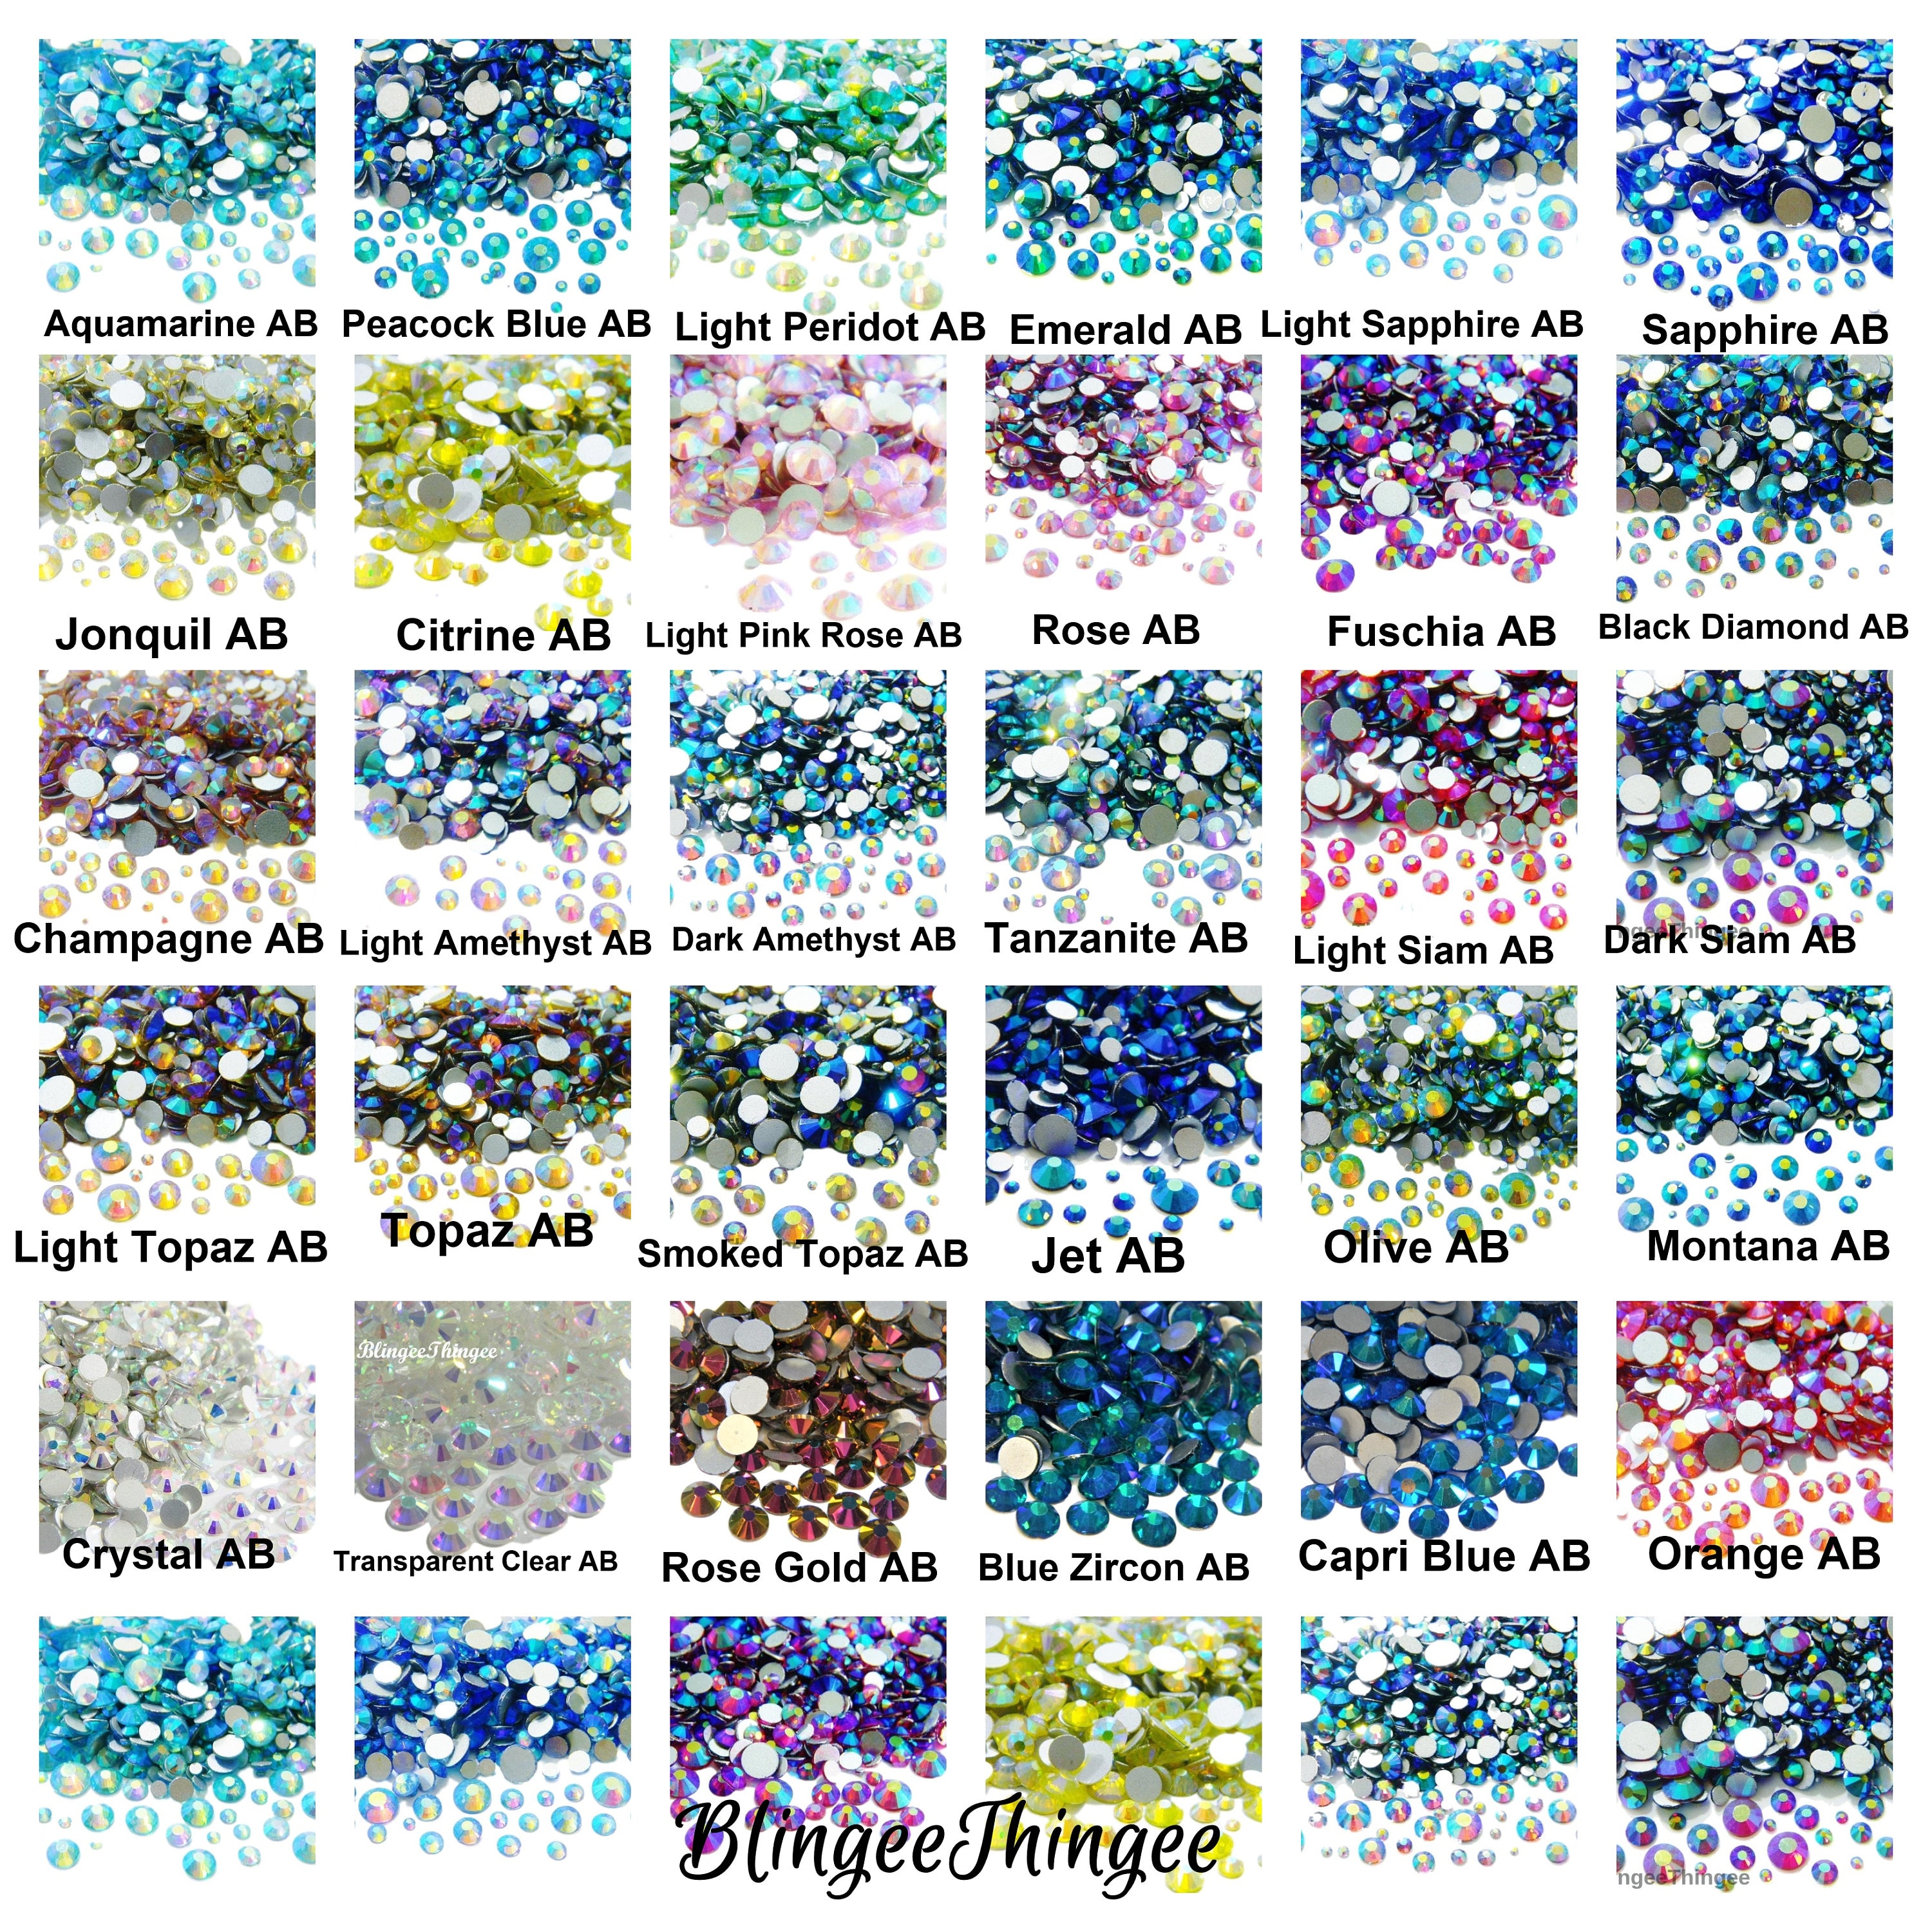 OUTUXED 5040pcs Clear Rhinestones for Crafts, Flatback White Nail Gems,  Craft Glass Diamonds Stones with Tweezers and Picking Pen, SS6-SS20 Crystal  - Yahoo Shopping